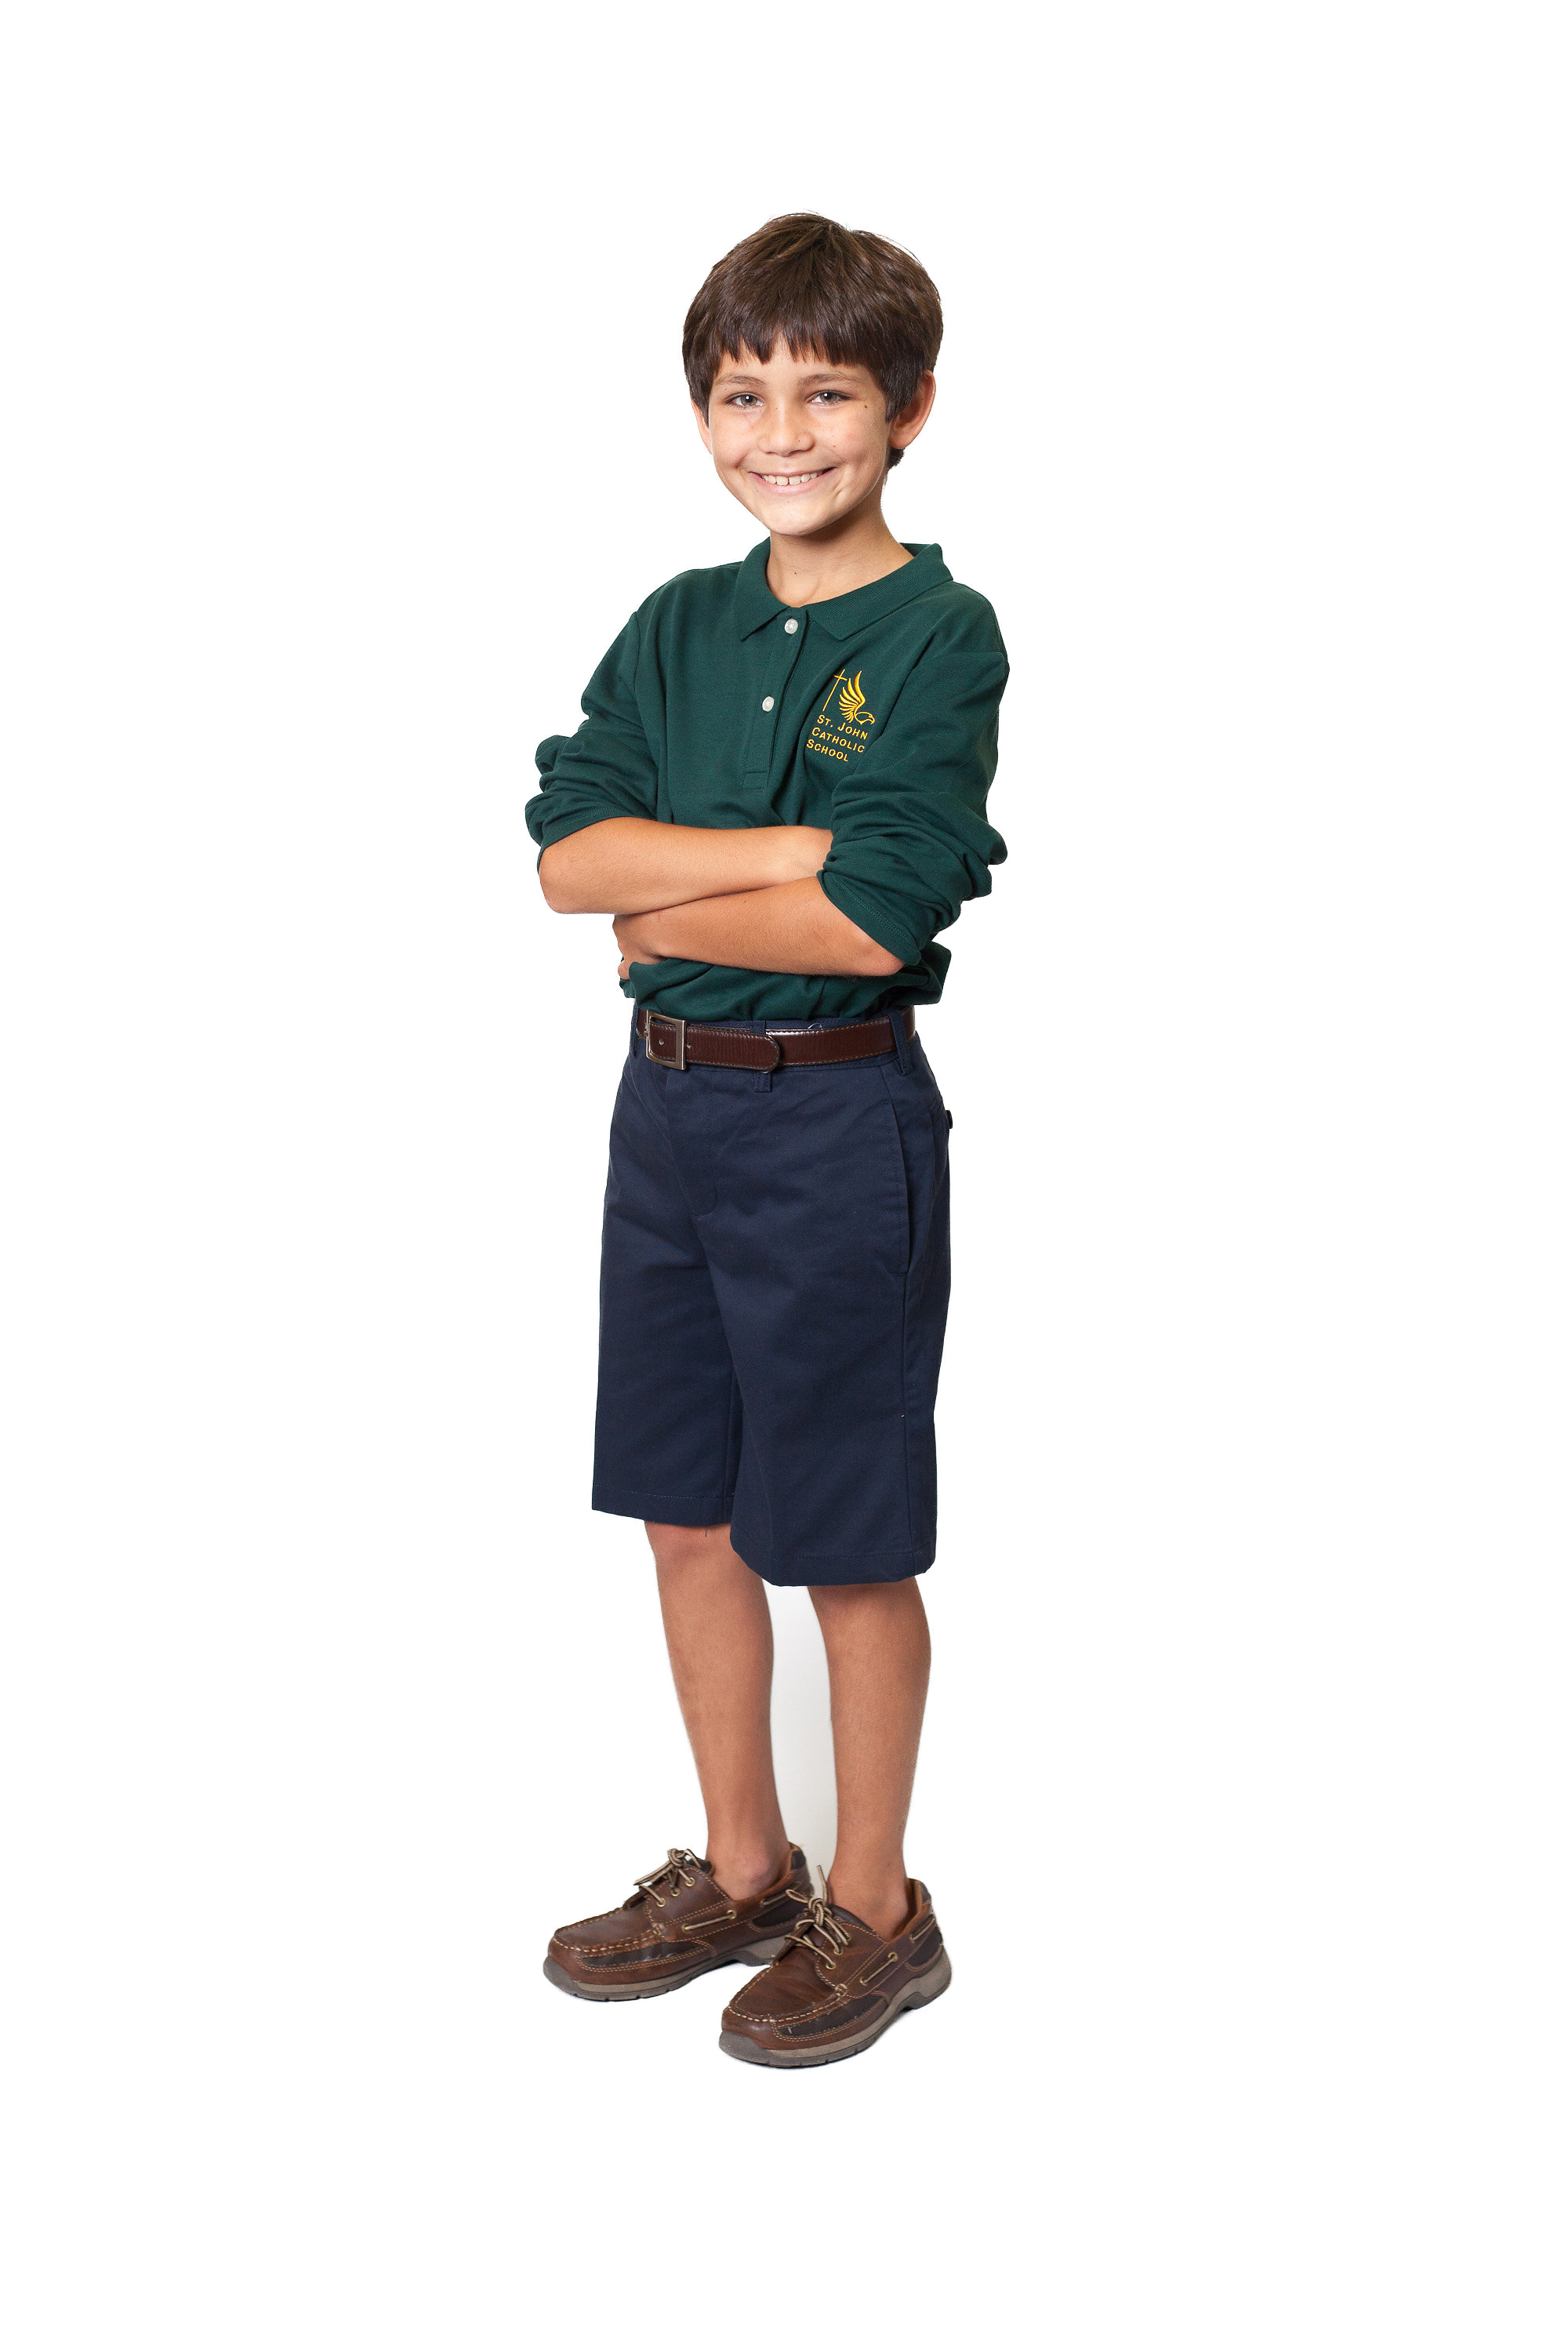 A Boy Standing With His Arms Crossed